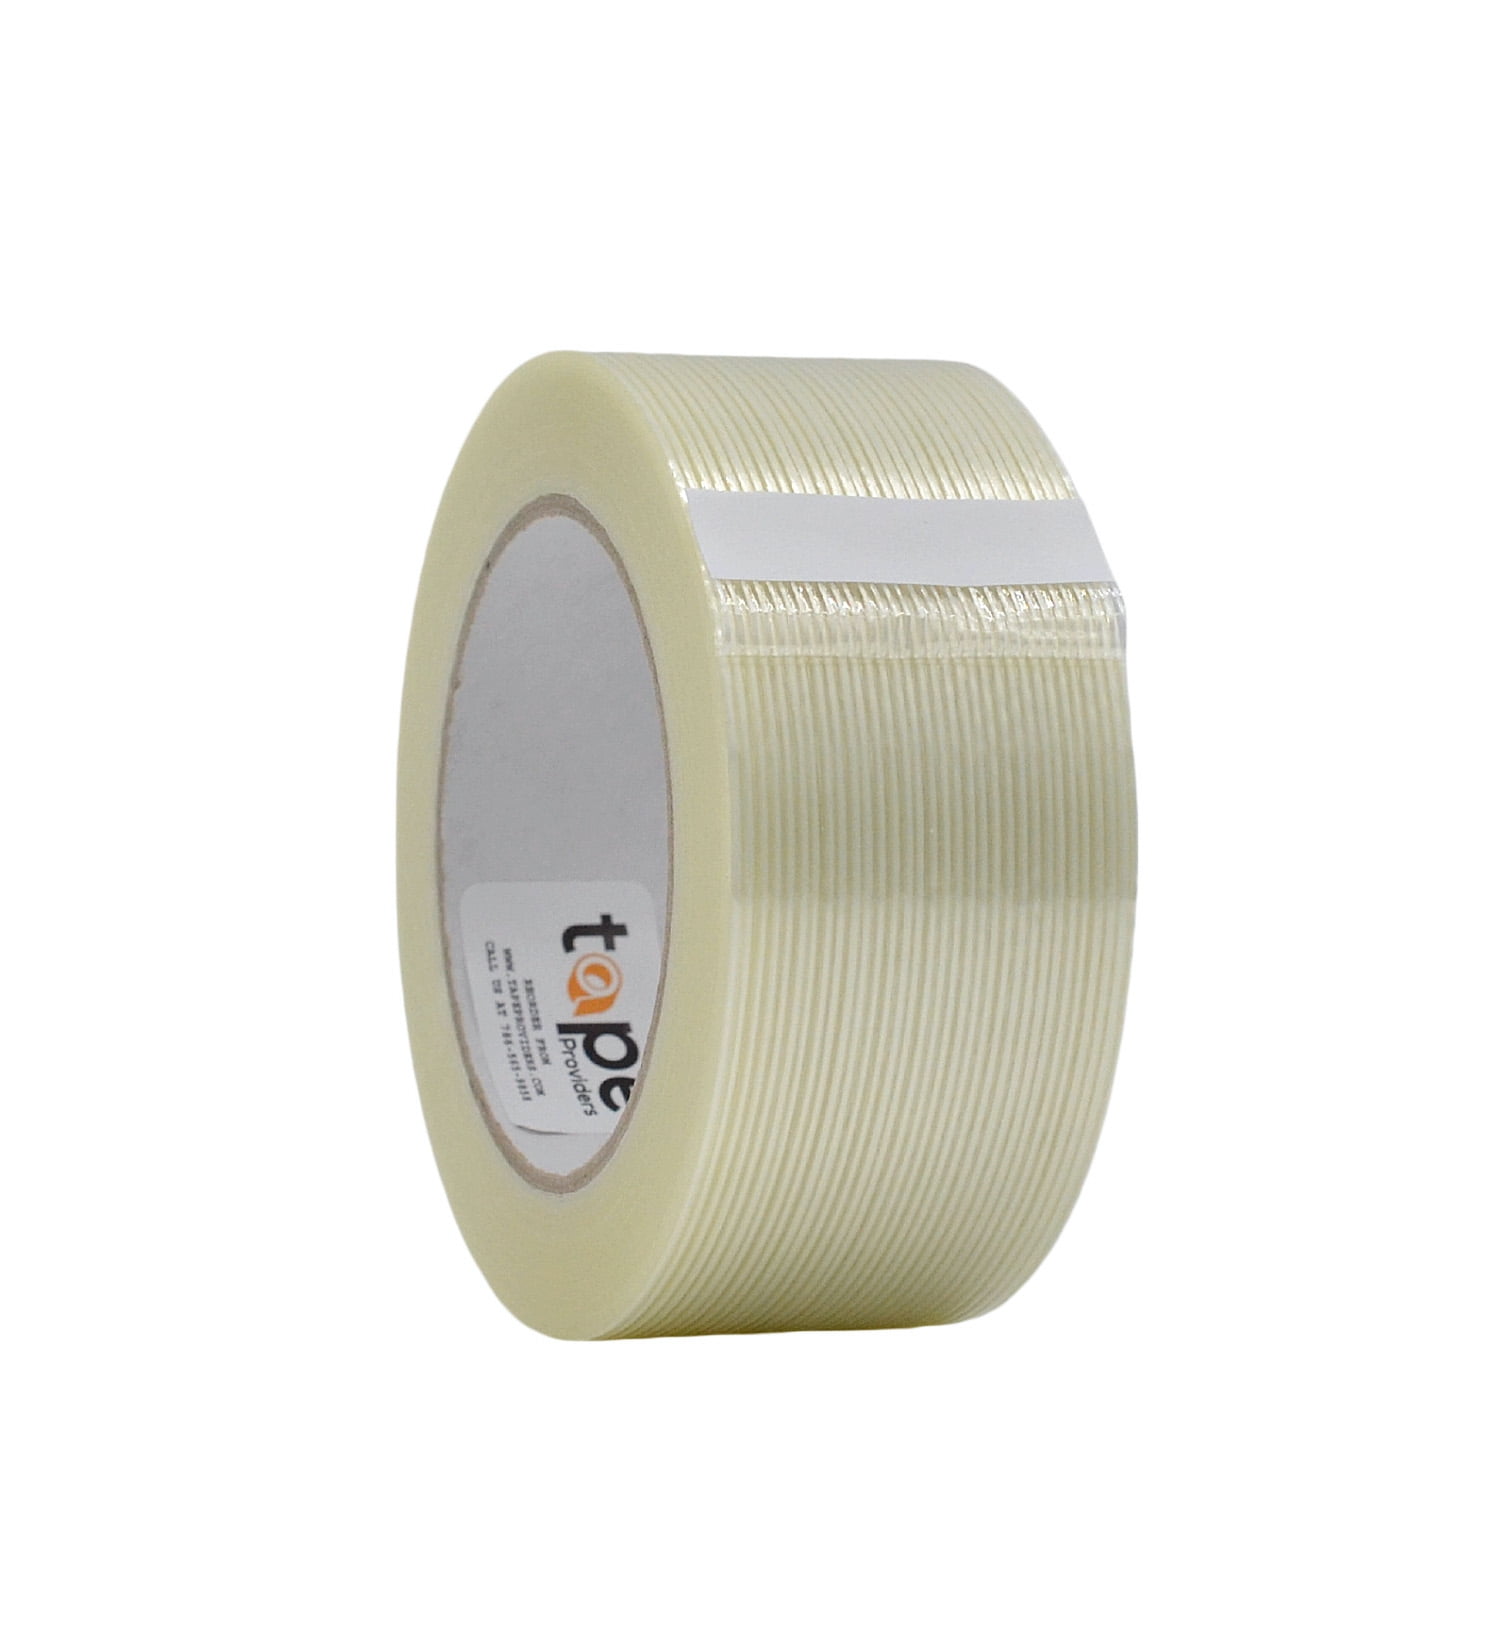 2 Inch Wide x 60 Yards Length Tear Resistant Filament Strapping Tape 2 Width Heavy Duty Self Adhesive Packing Tape 